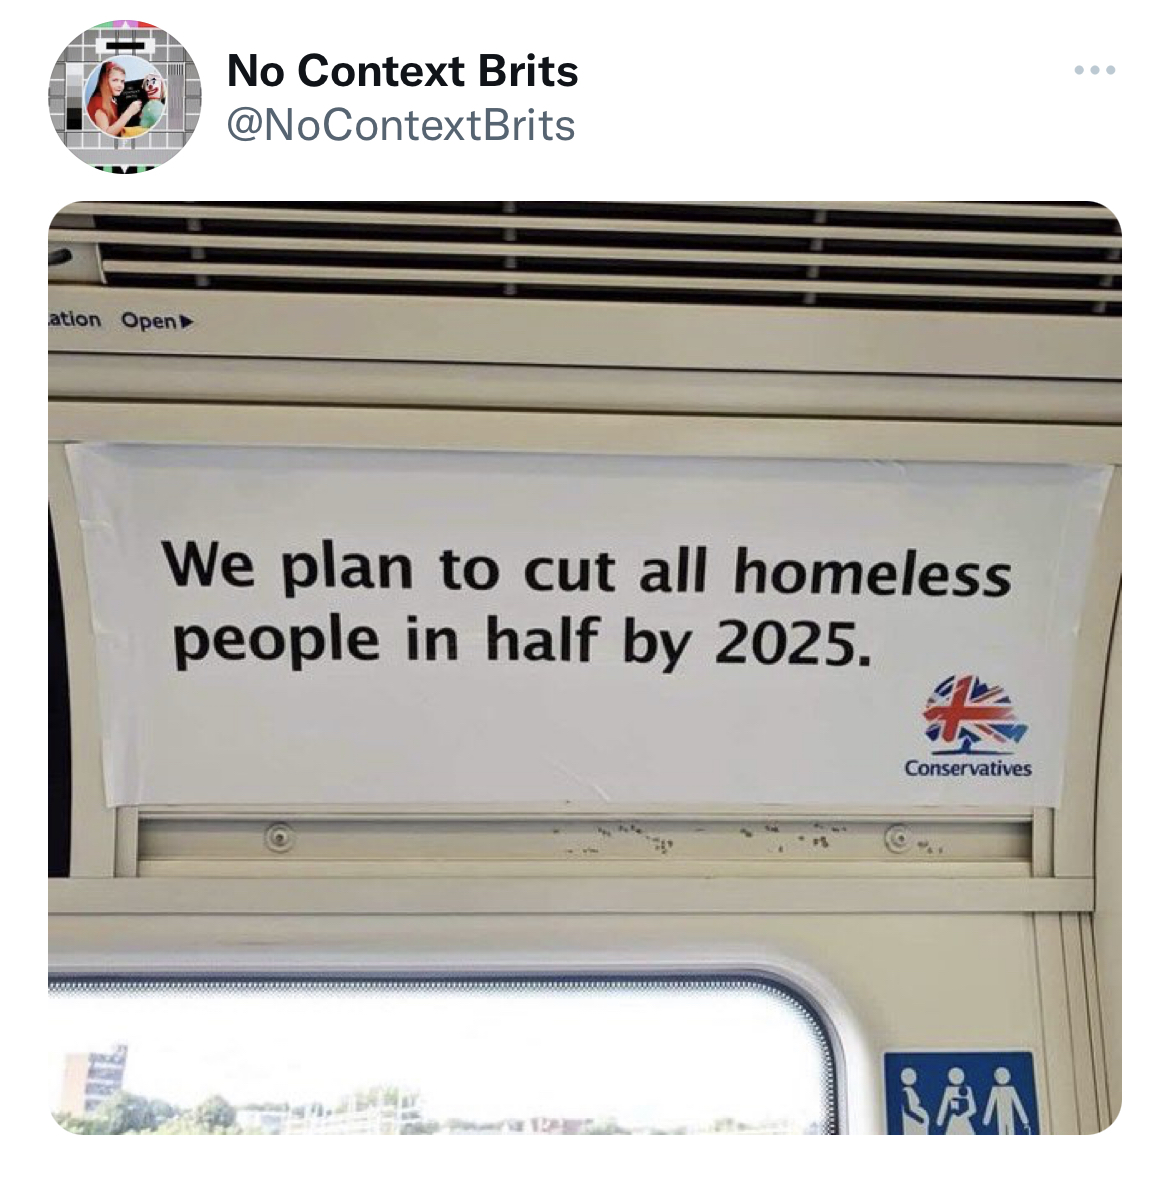 Fresh and funny tweets - material - ation Open No Context Brits We plan to cut all homeless people in half by 2025. Conservatives San